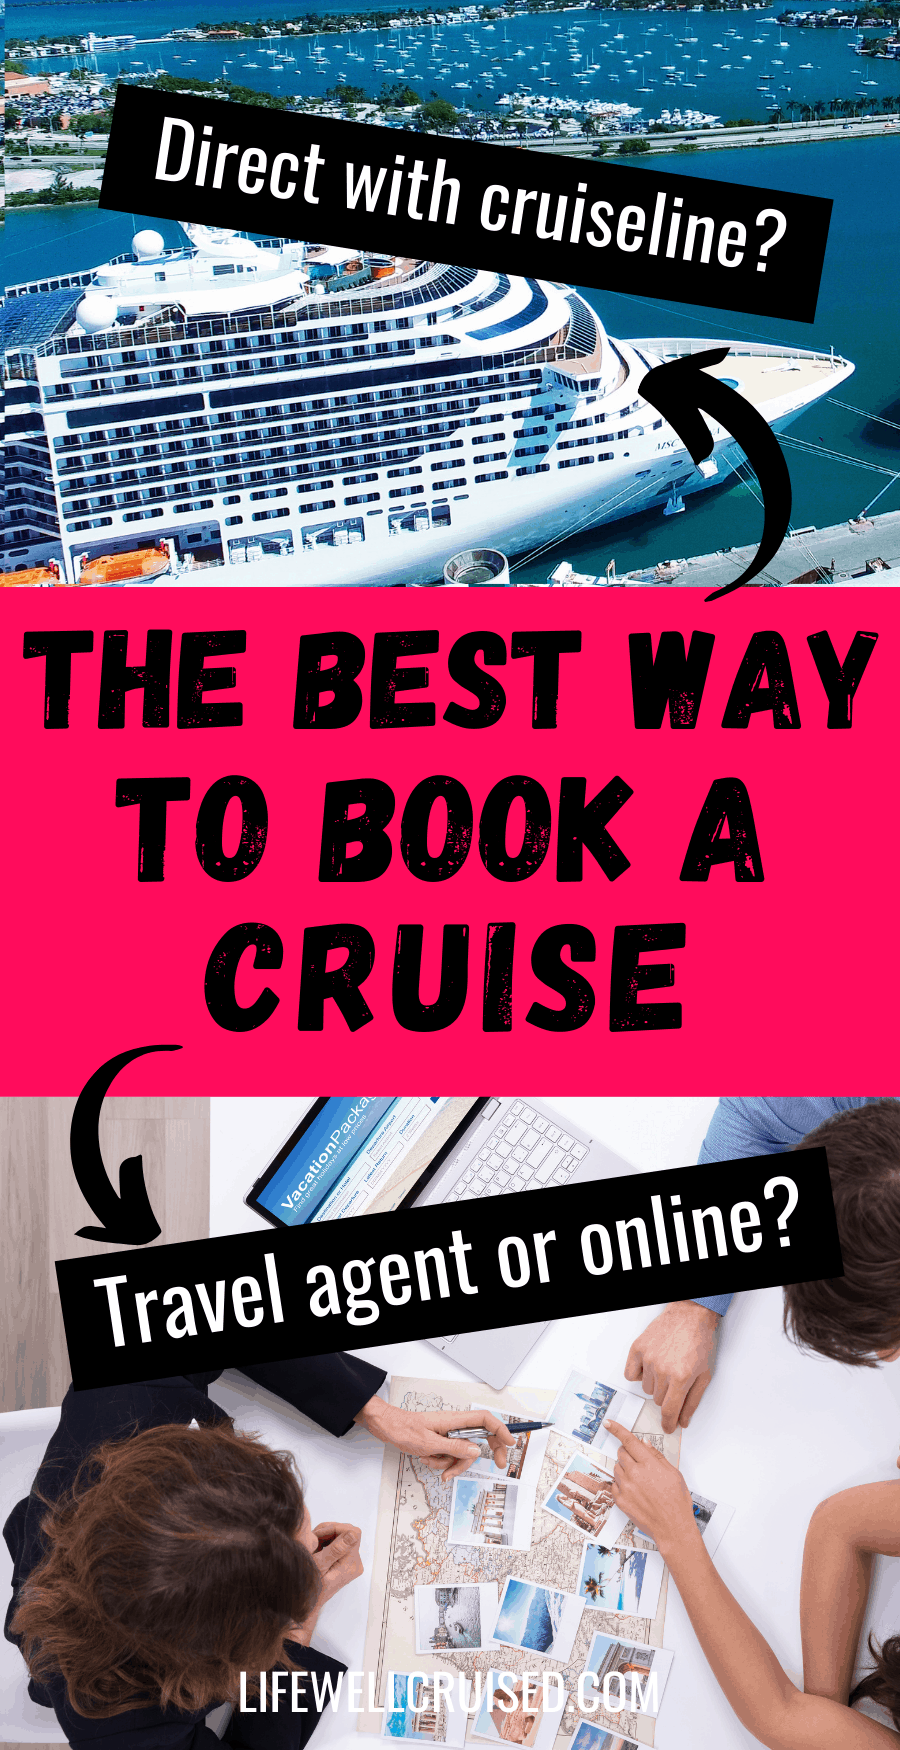 book cruise with travel agent or online